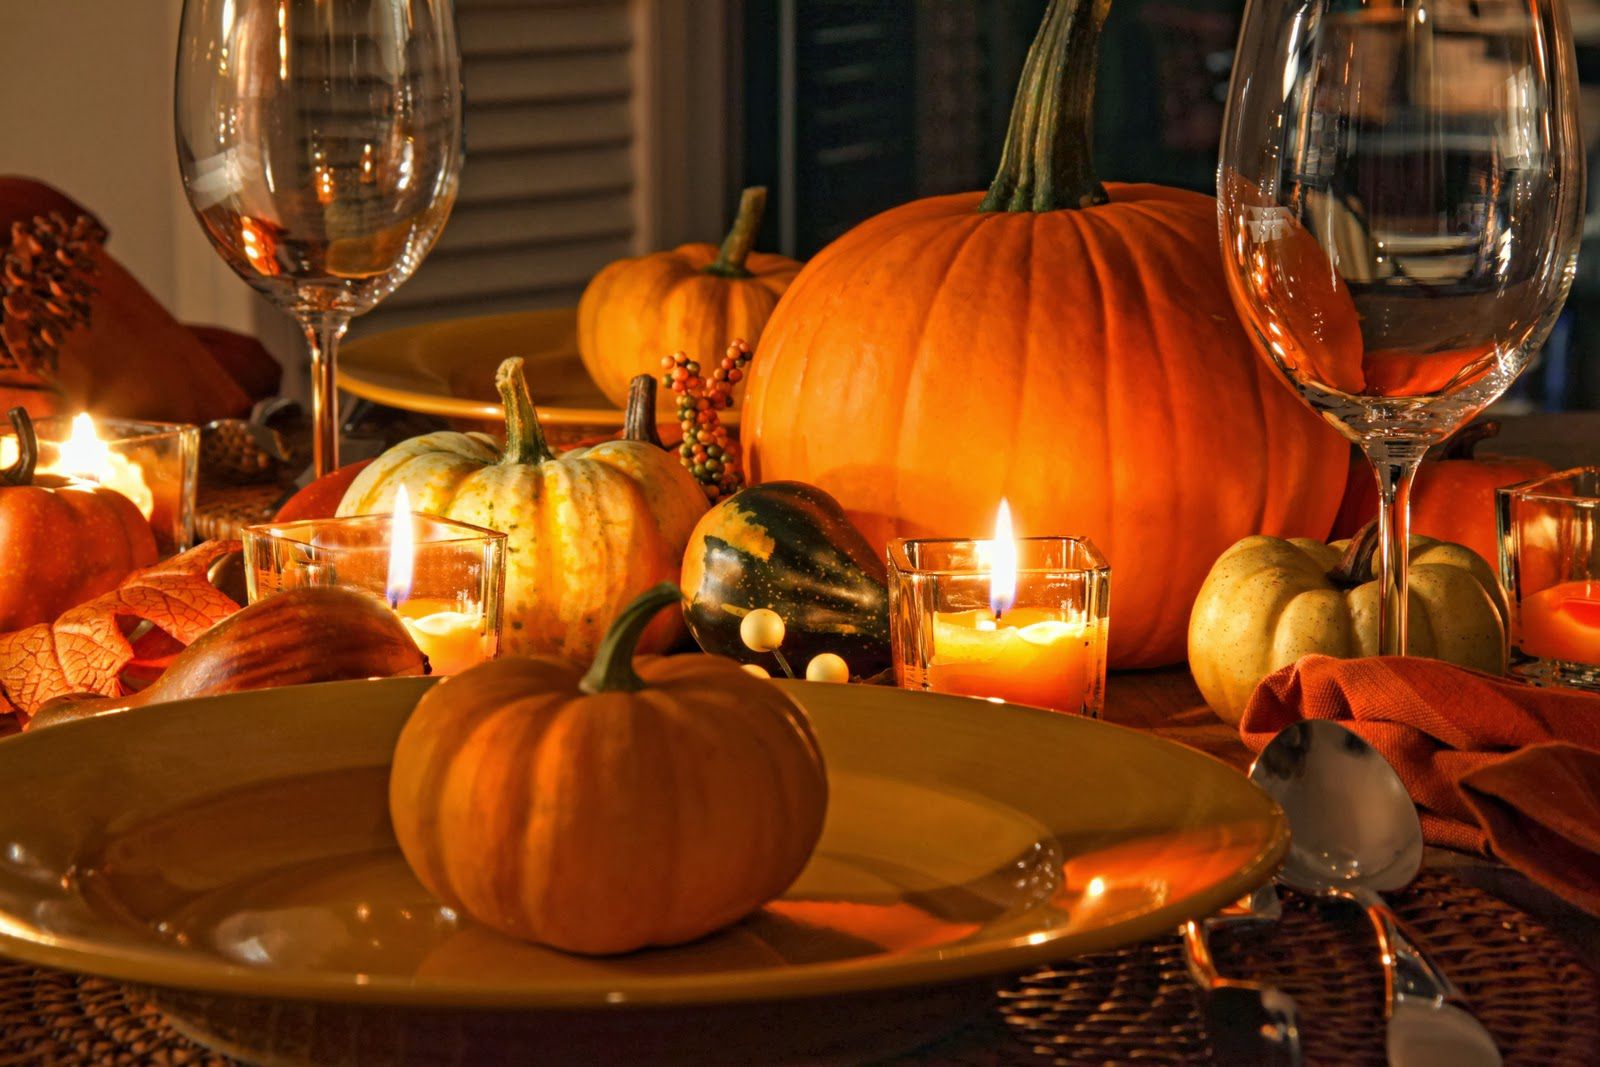 3 WAYS TO DECORATE THE TABLE FOR THANKSGIVING